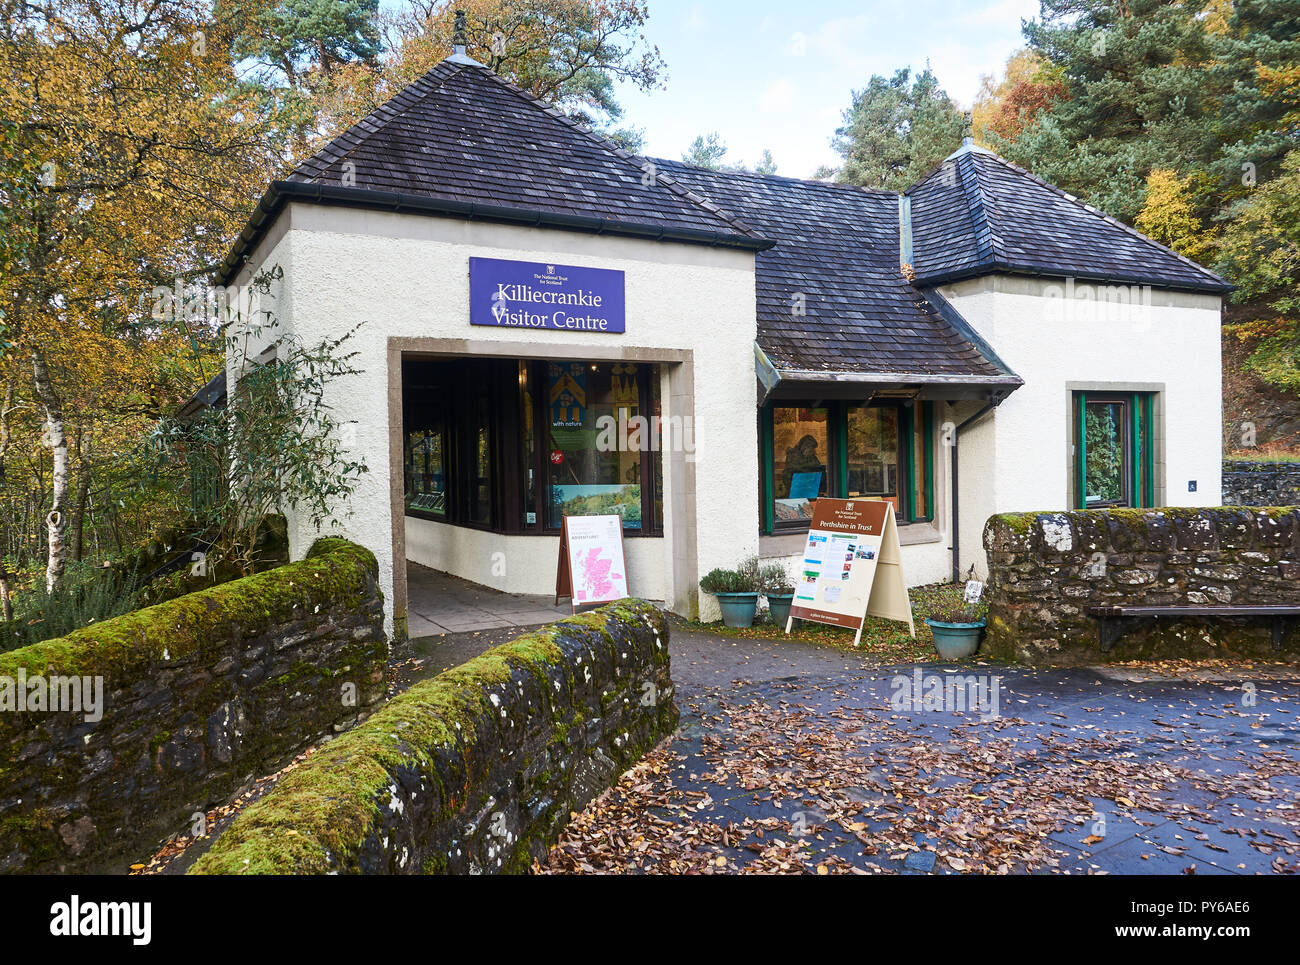 Killiecrankie Visitor Centre, a starting point to National Trust trails and the popular Soldier's Leap, Pertshire, Scotland. Stock Photo